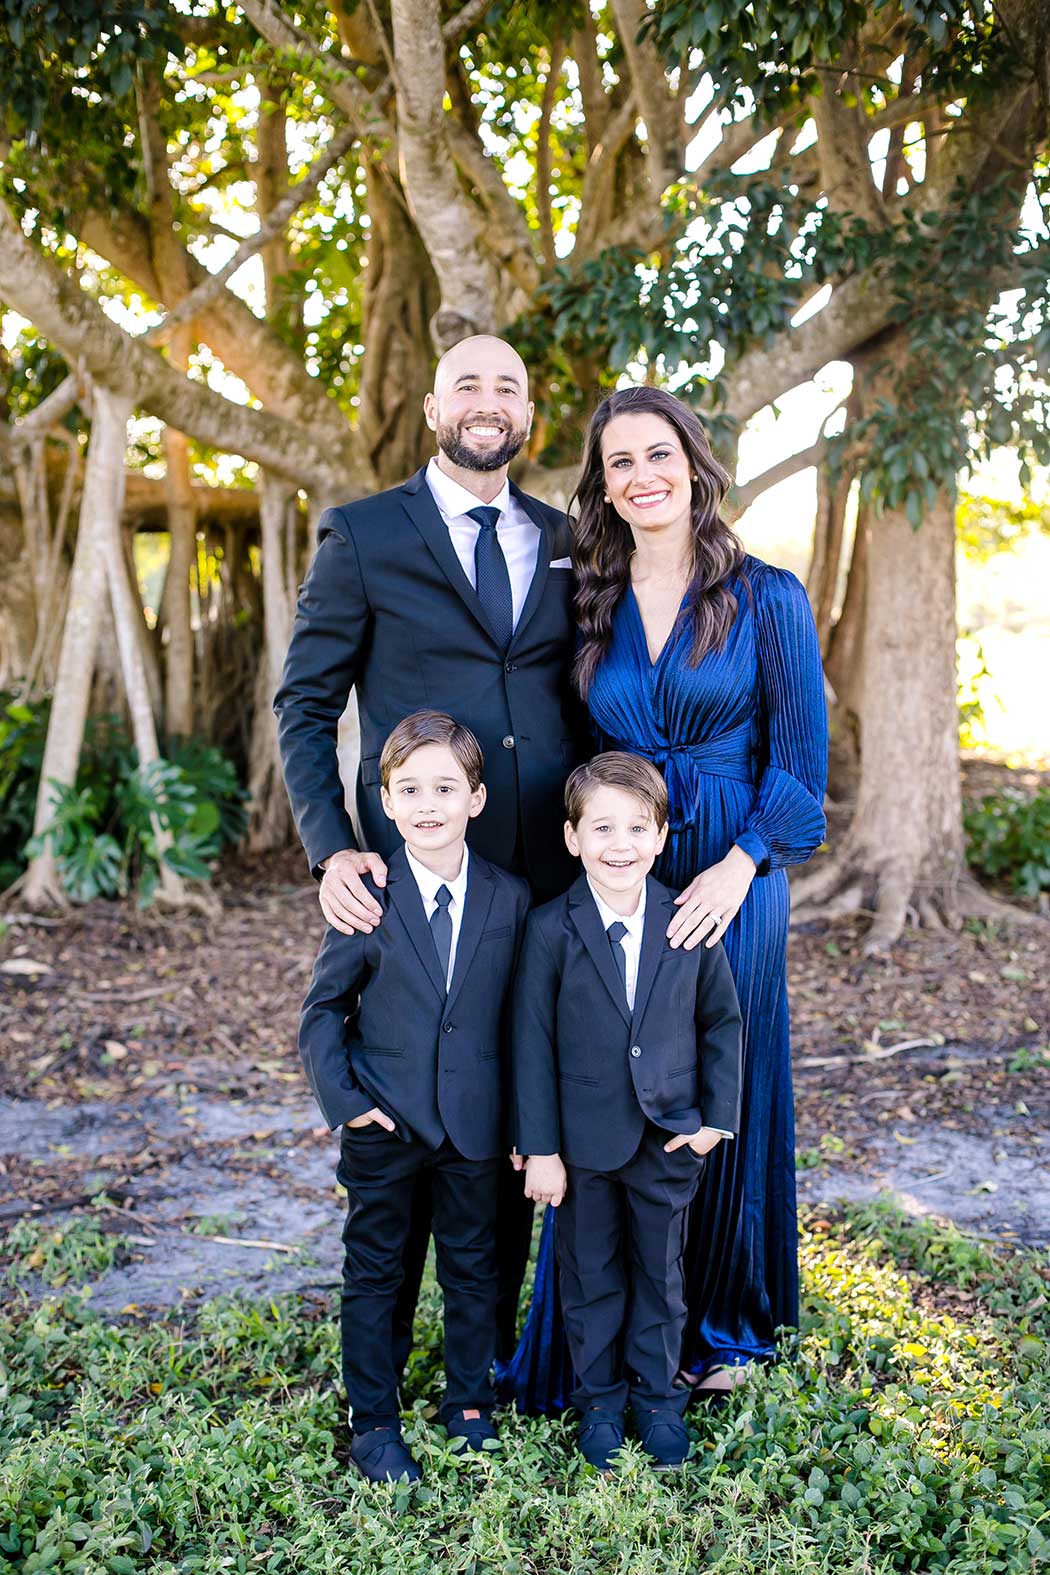 formal family photography in a park | park photography session with family 4 | twin boys photography | family photographer robbins preserve | fort lauderdale family photography session